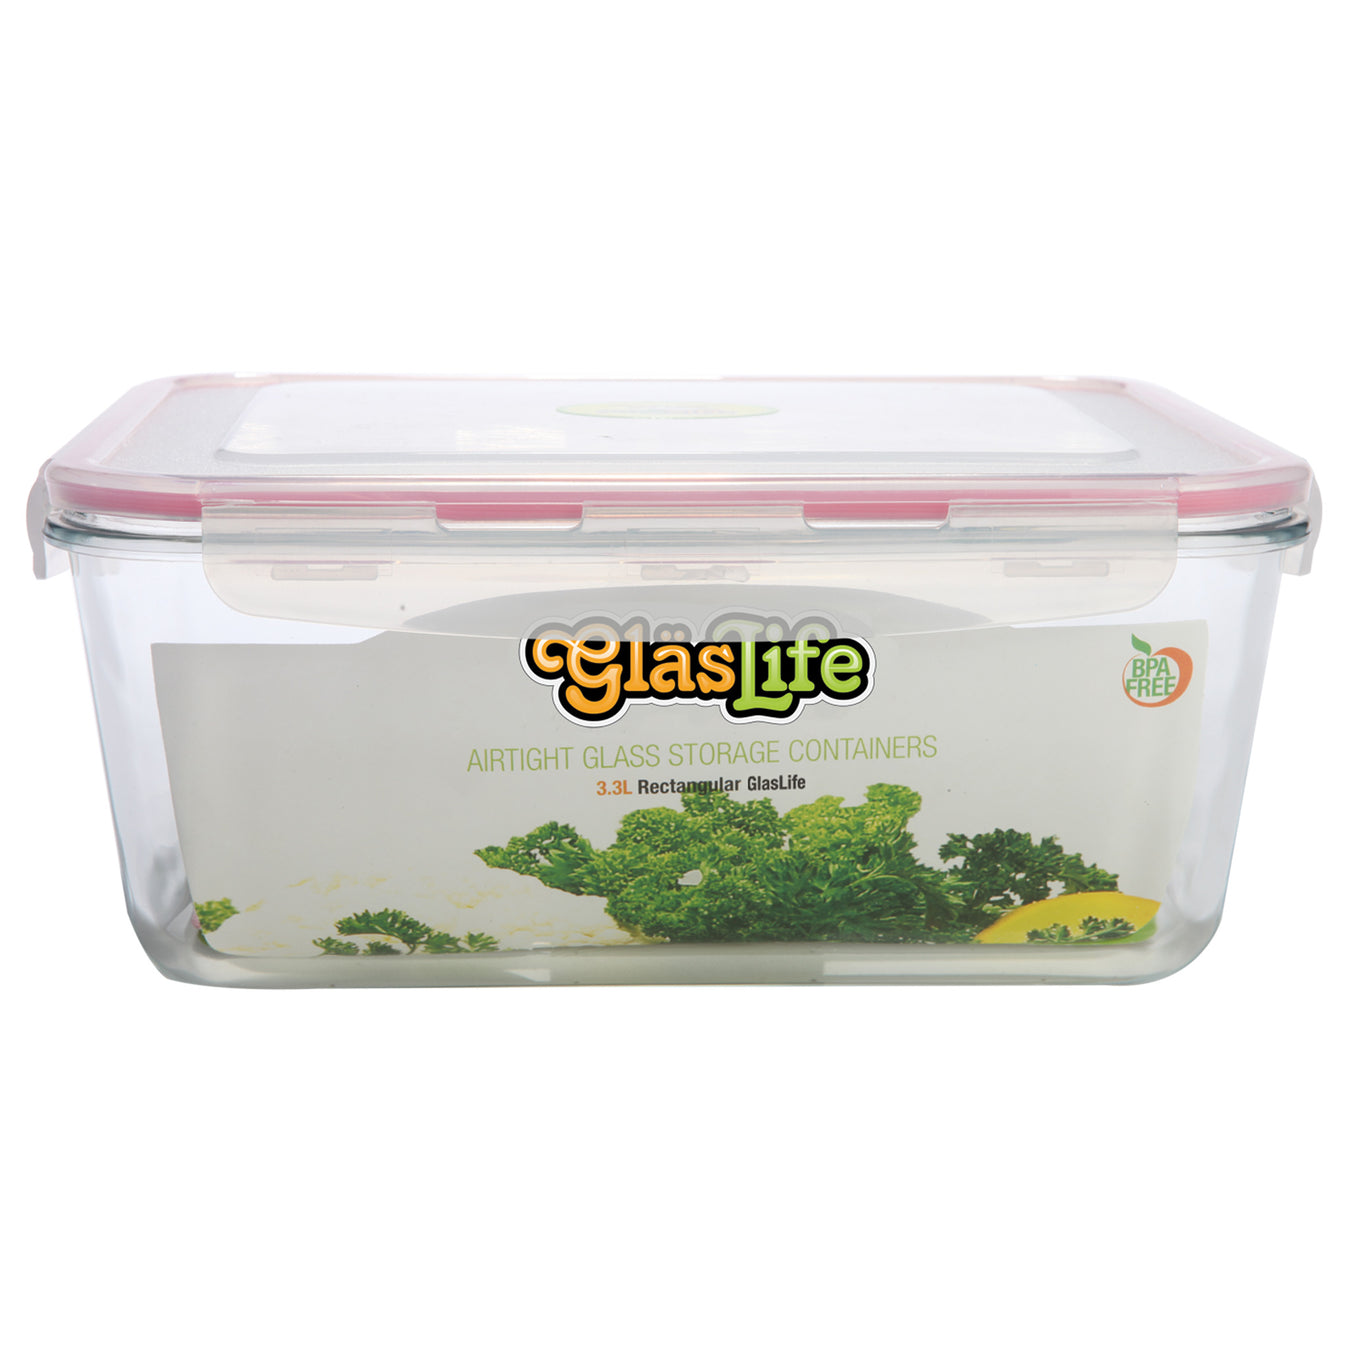 GlasLife® Air-Tight Glass Storage Container - Rectangular 